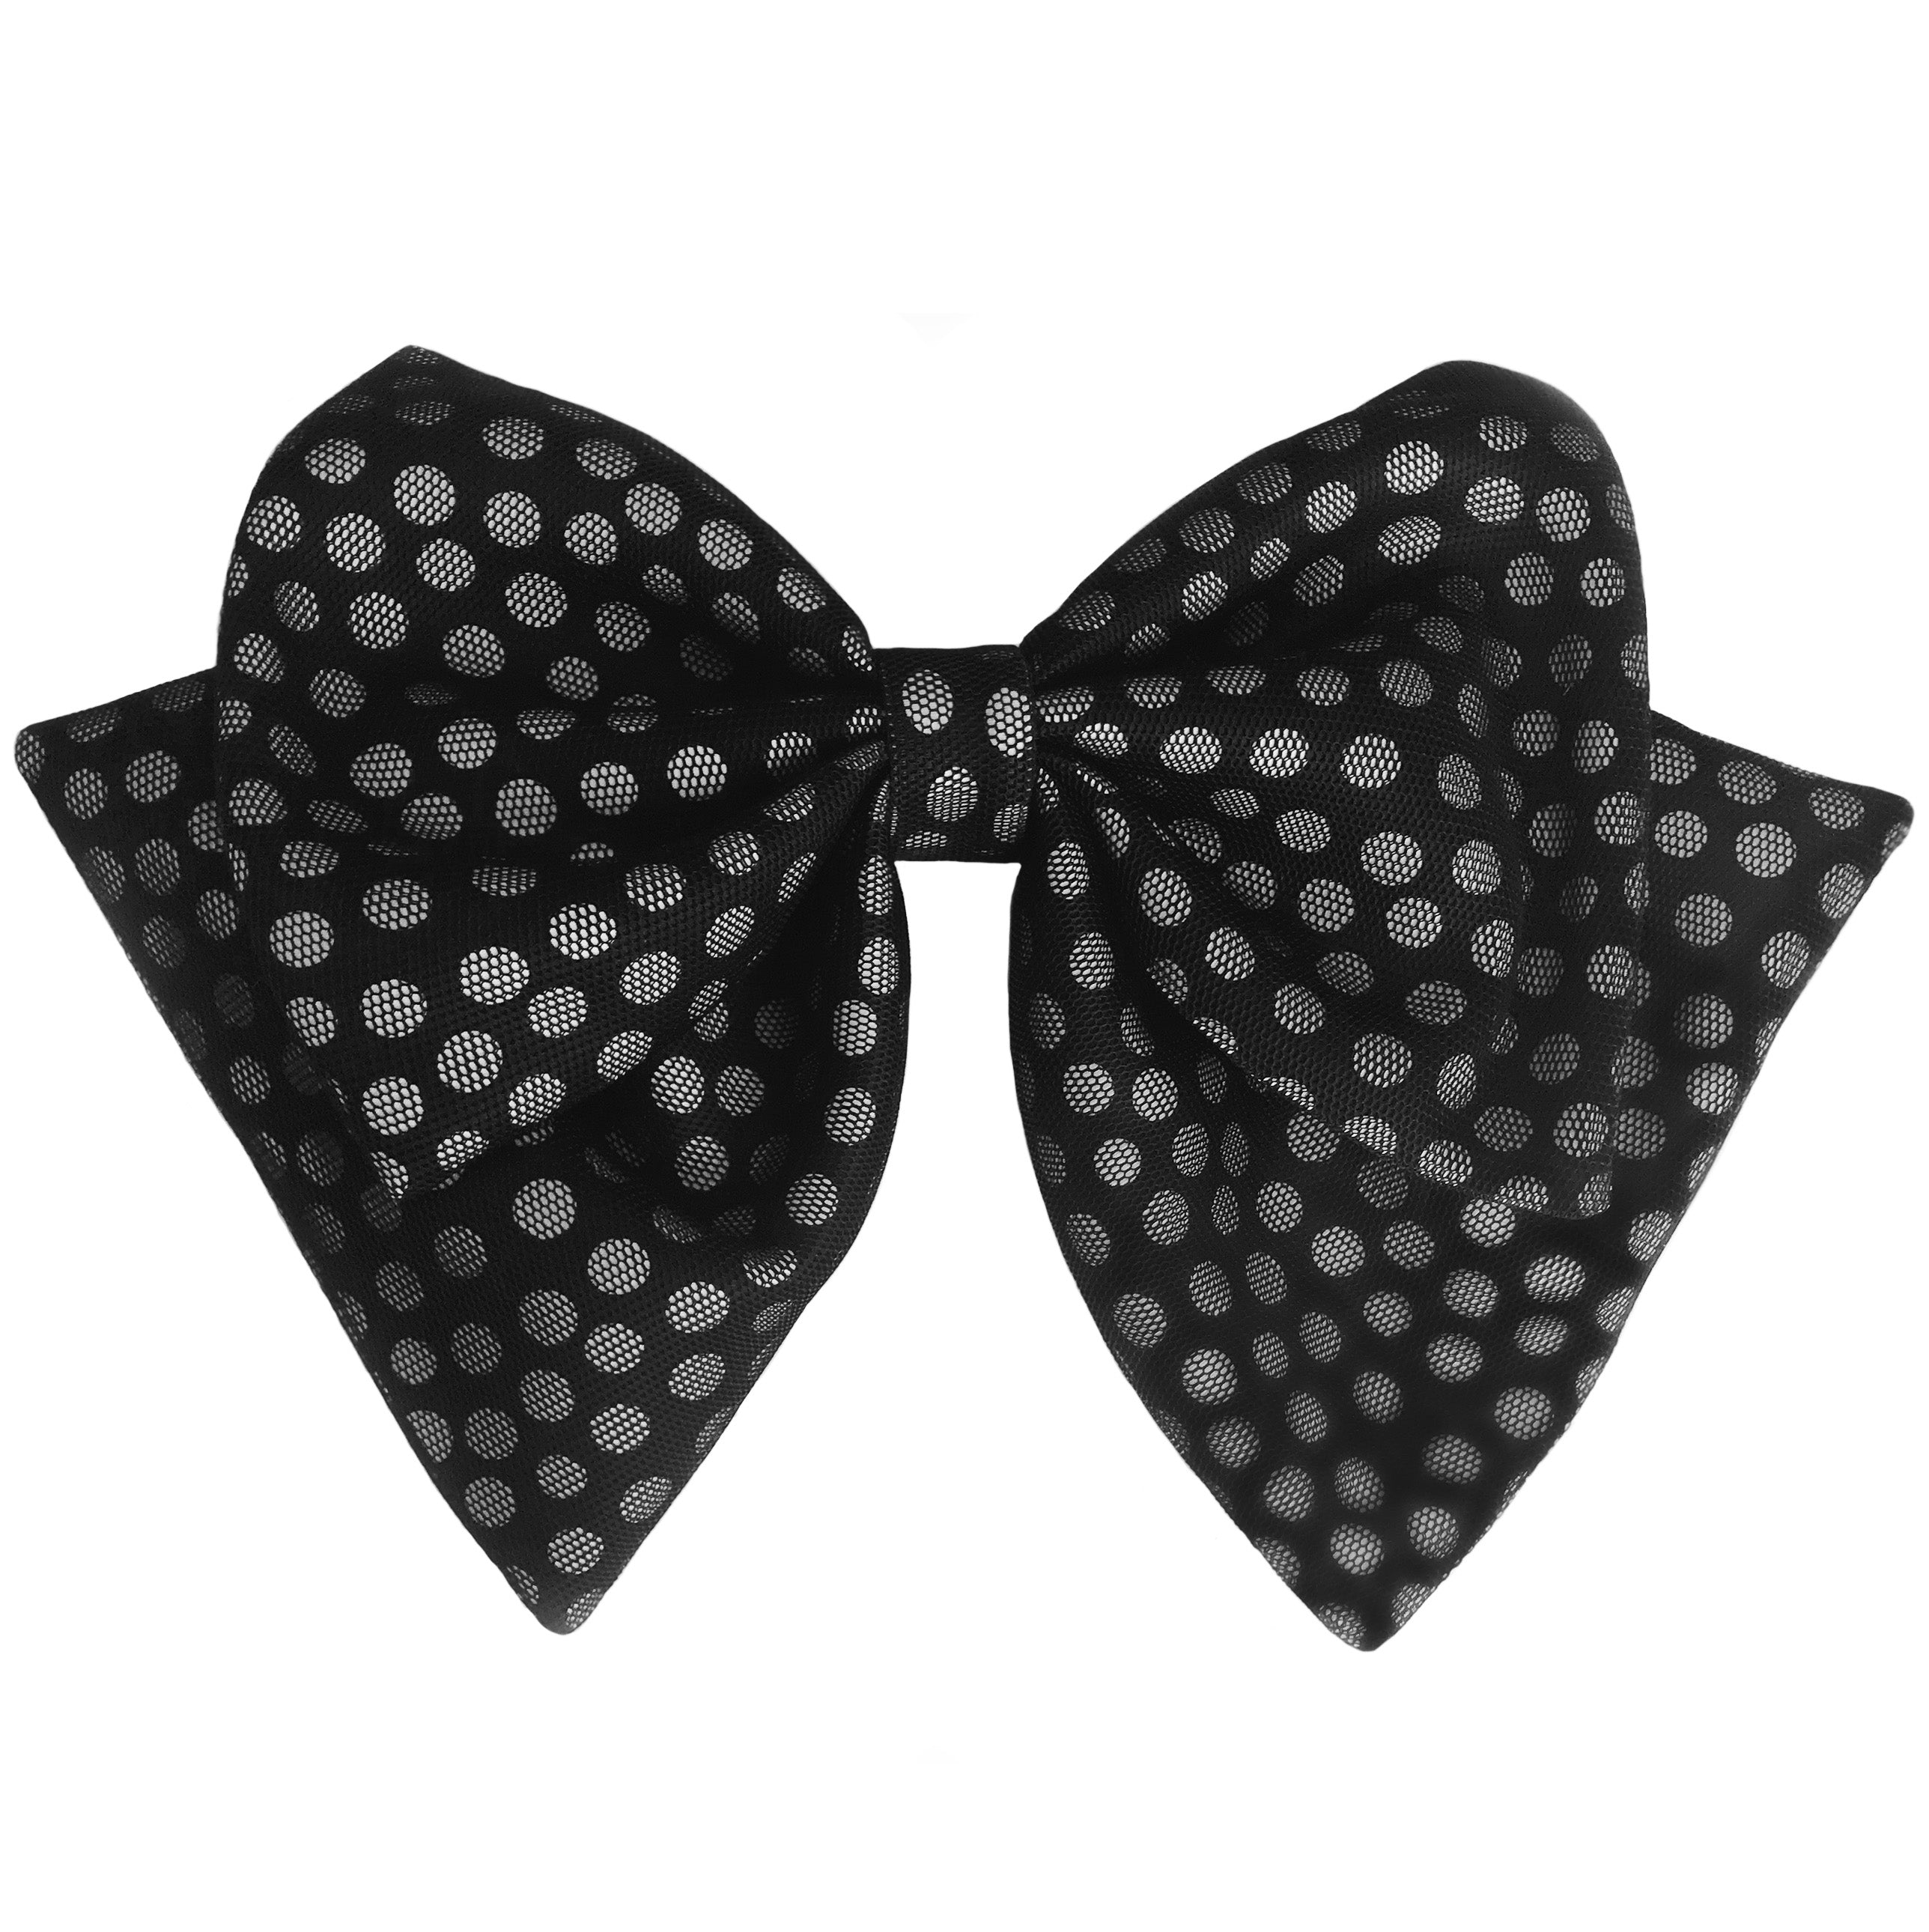 The Tie Me Up Bow Polka dot